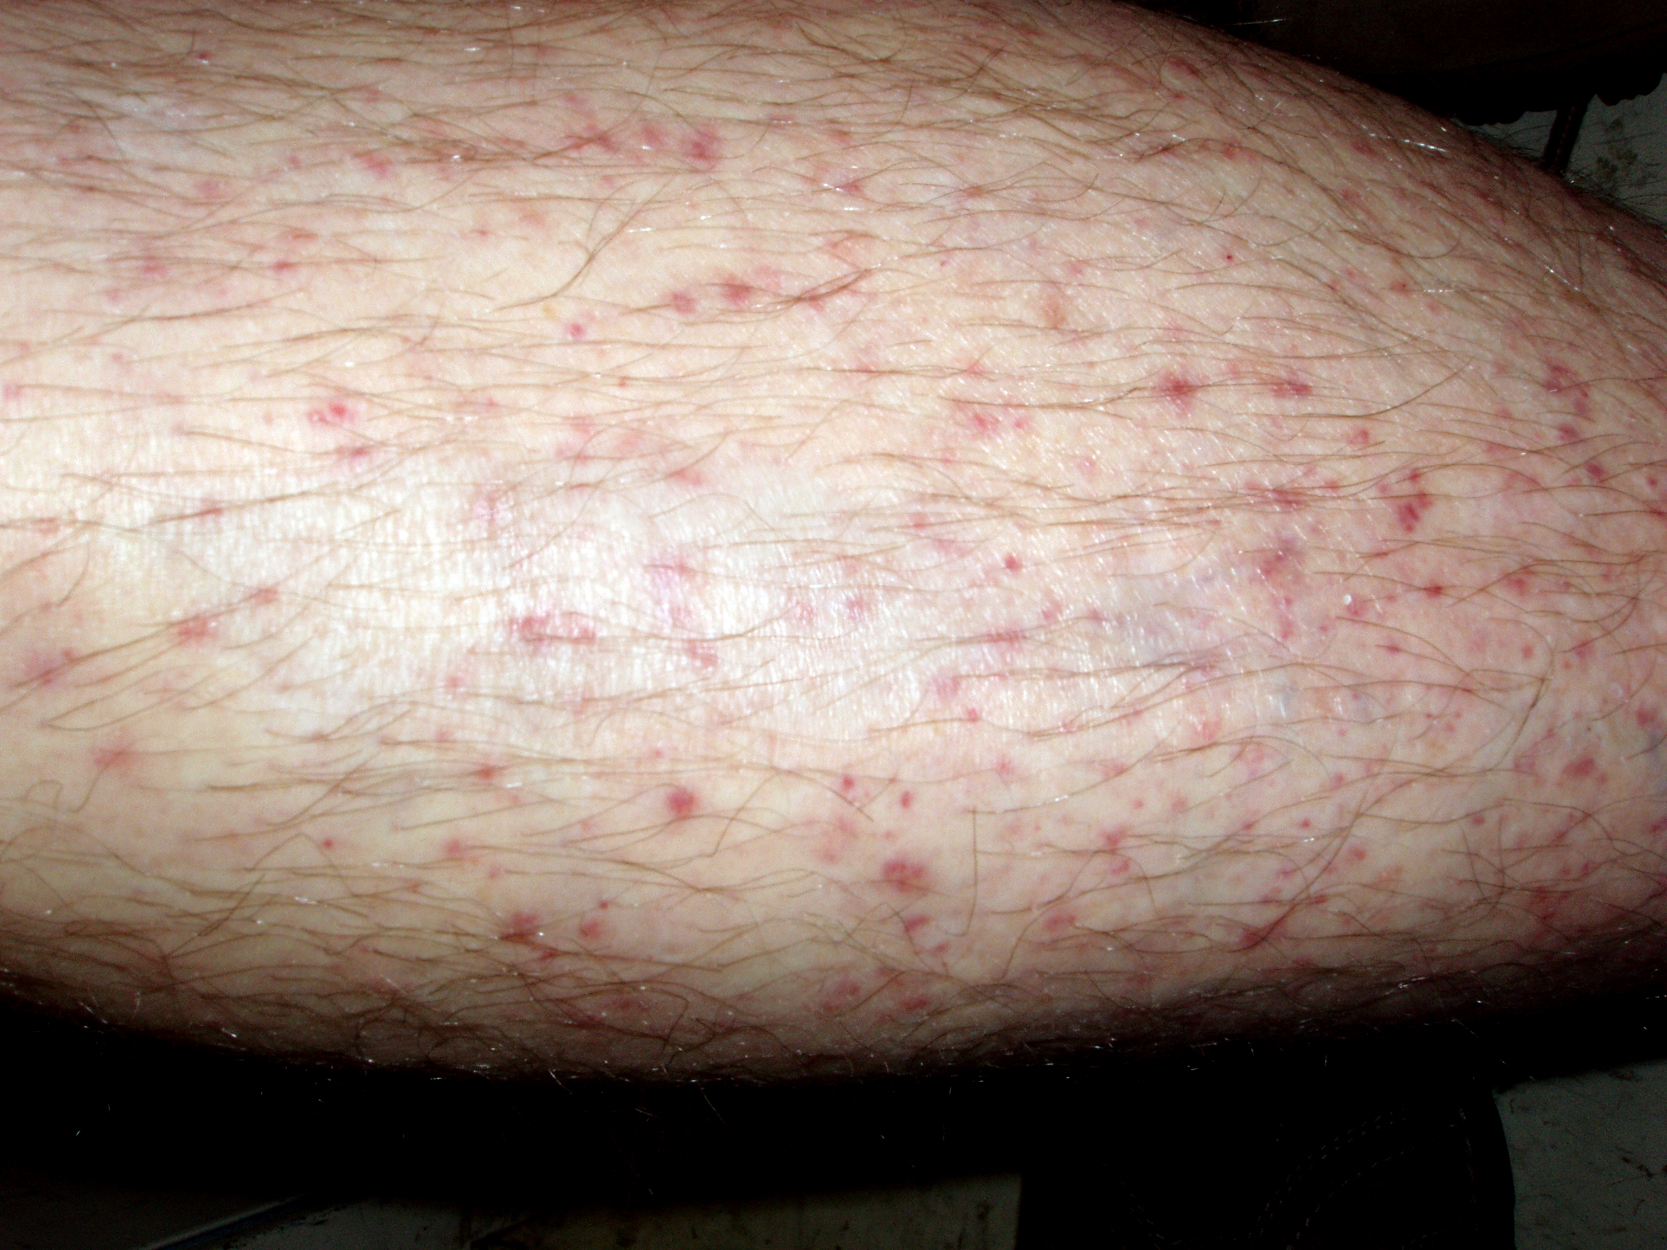 Red Spots On Legs Pictures Symptoms Causes Treatment Diseases | Images ...